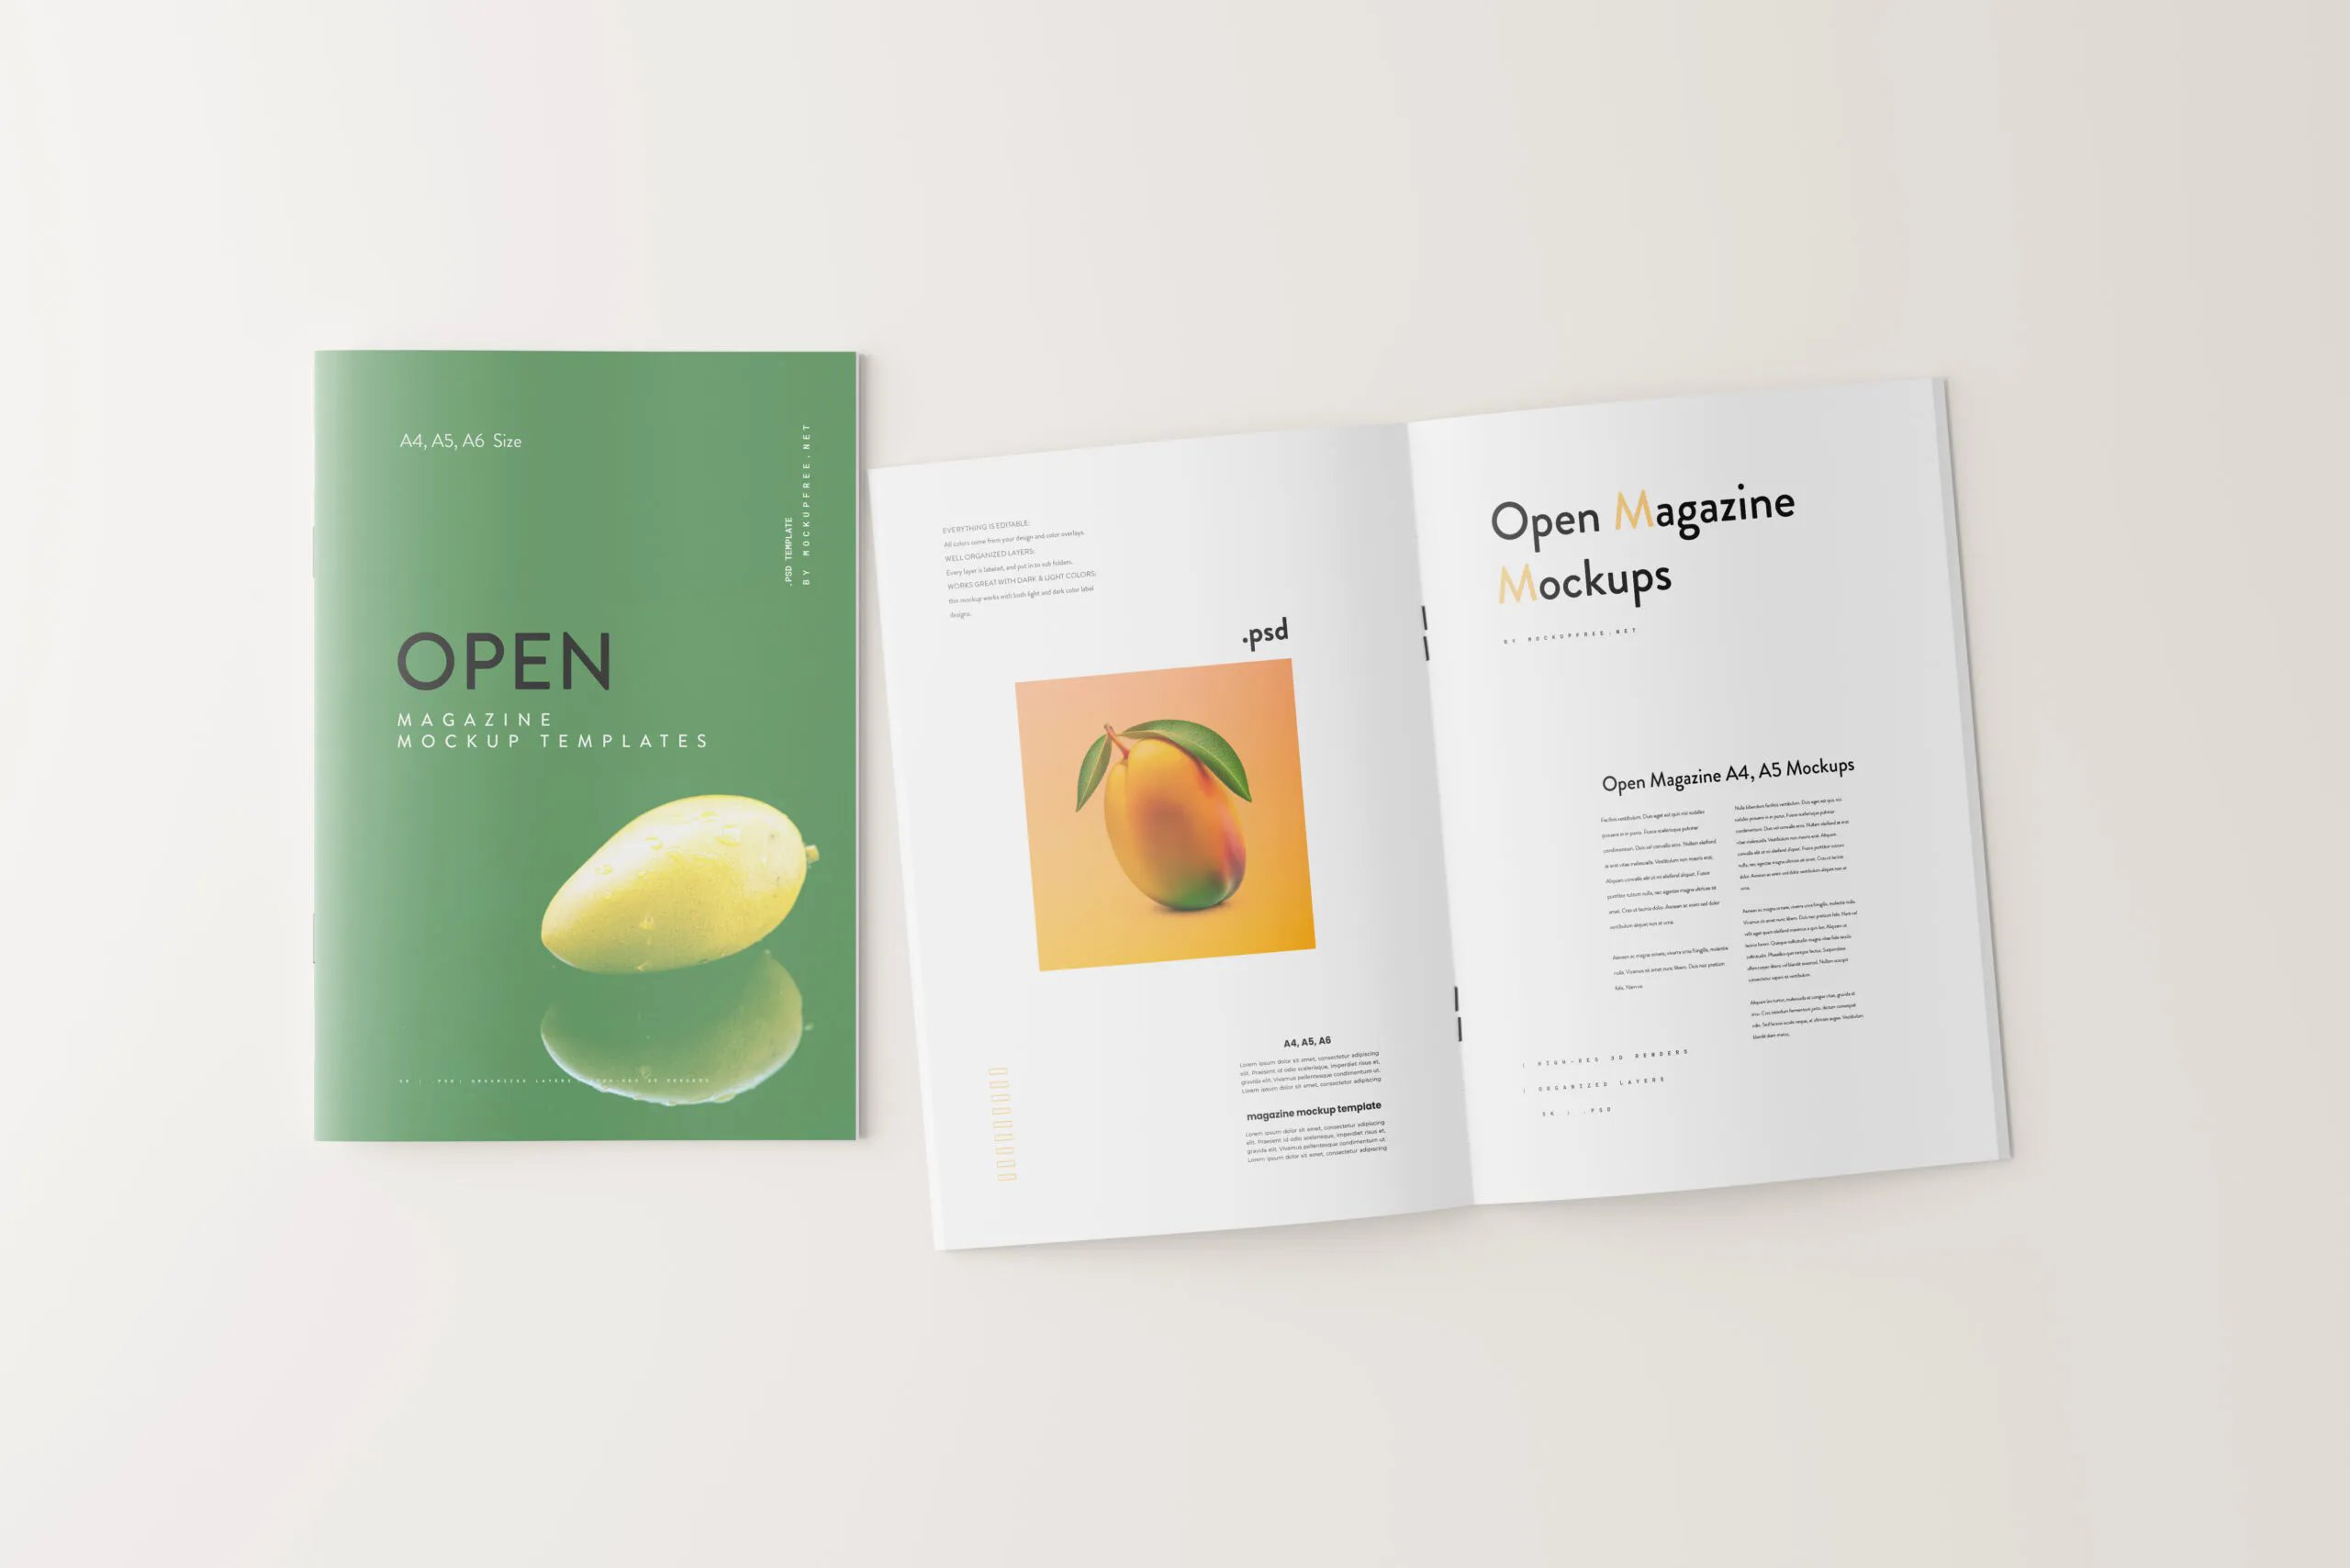 6 Open Magazine Mockups in Different Sights FREE PSD